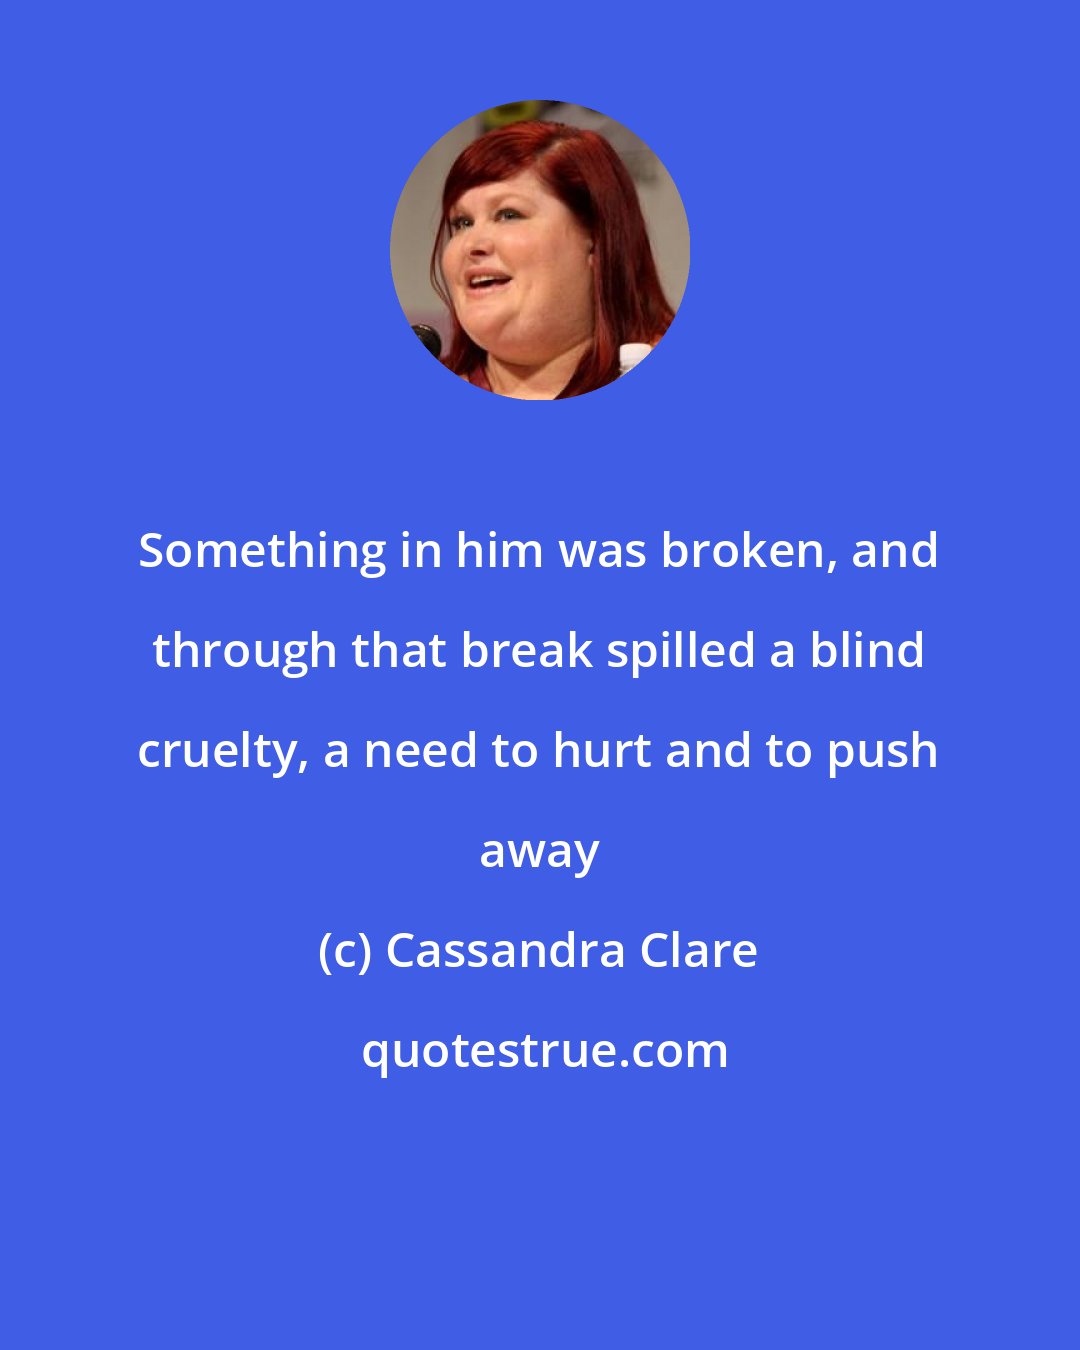 Cassandra Clare: Something in him was broken, and through that break spilled a blind cruelty, a need to hurt and to push away